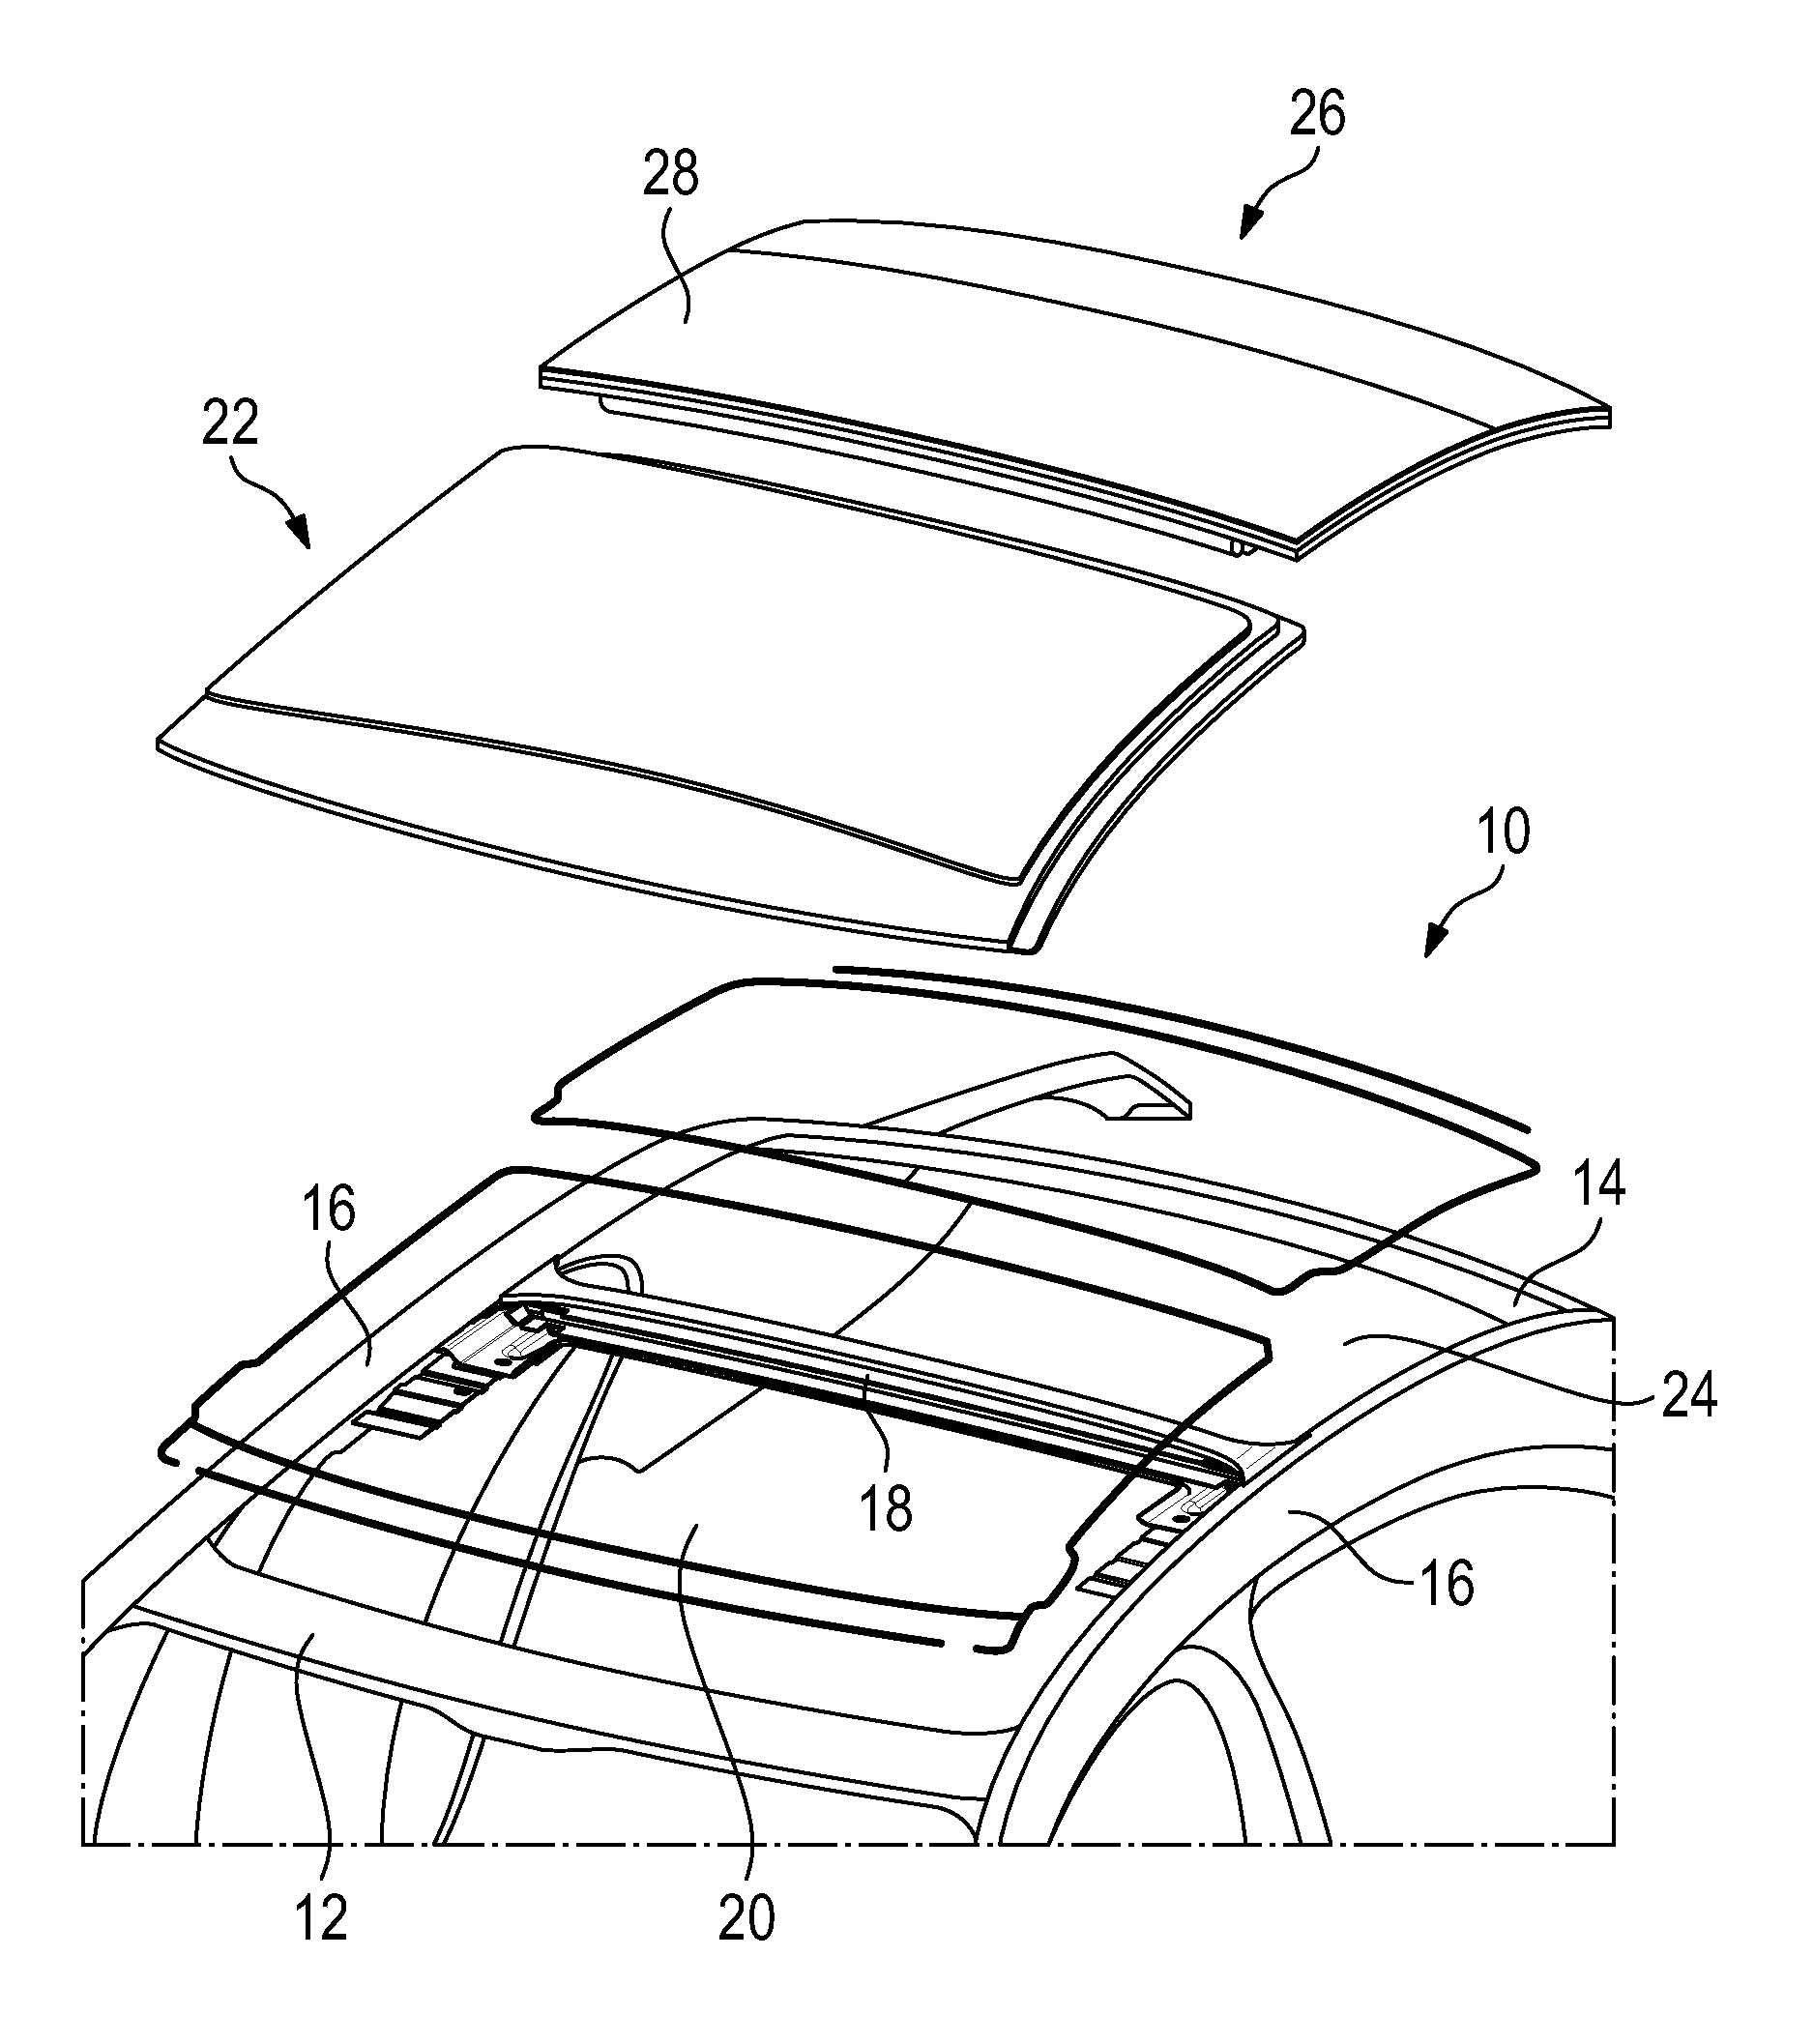 Roof construction for a motor vehicle and motor vehicle bodyshell